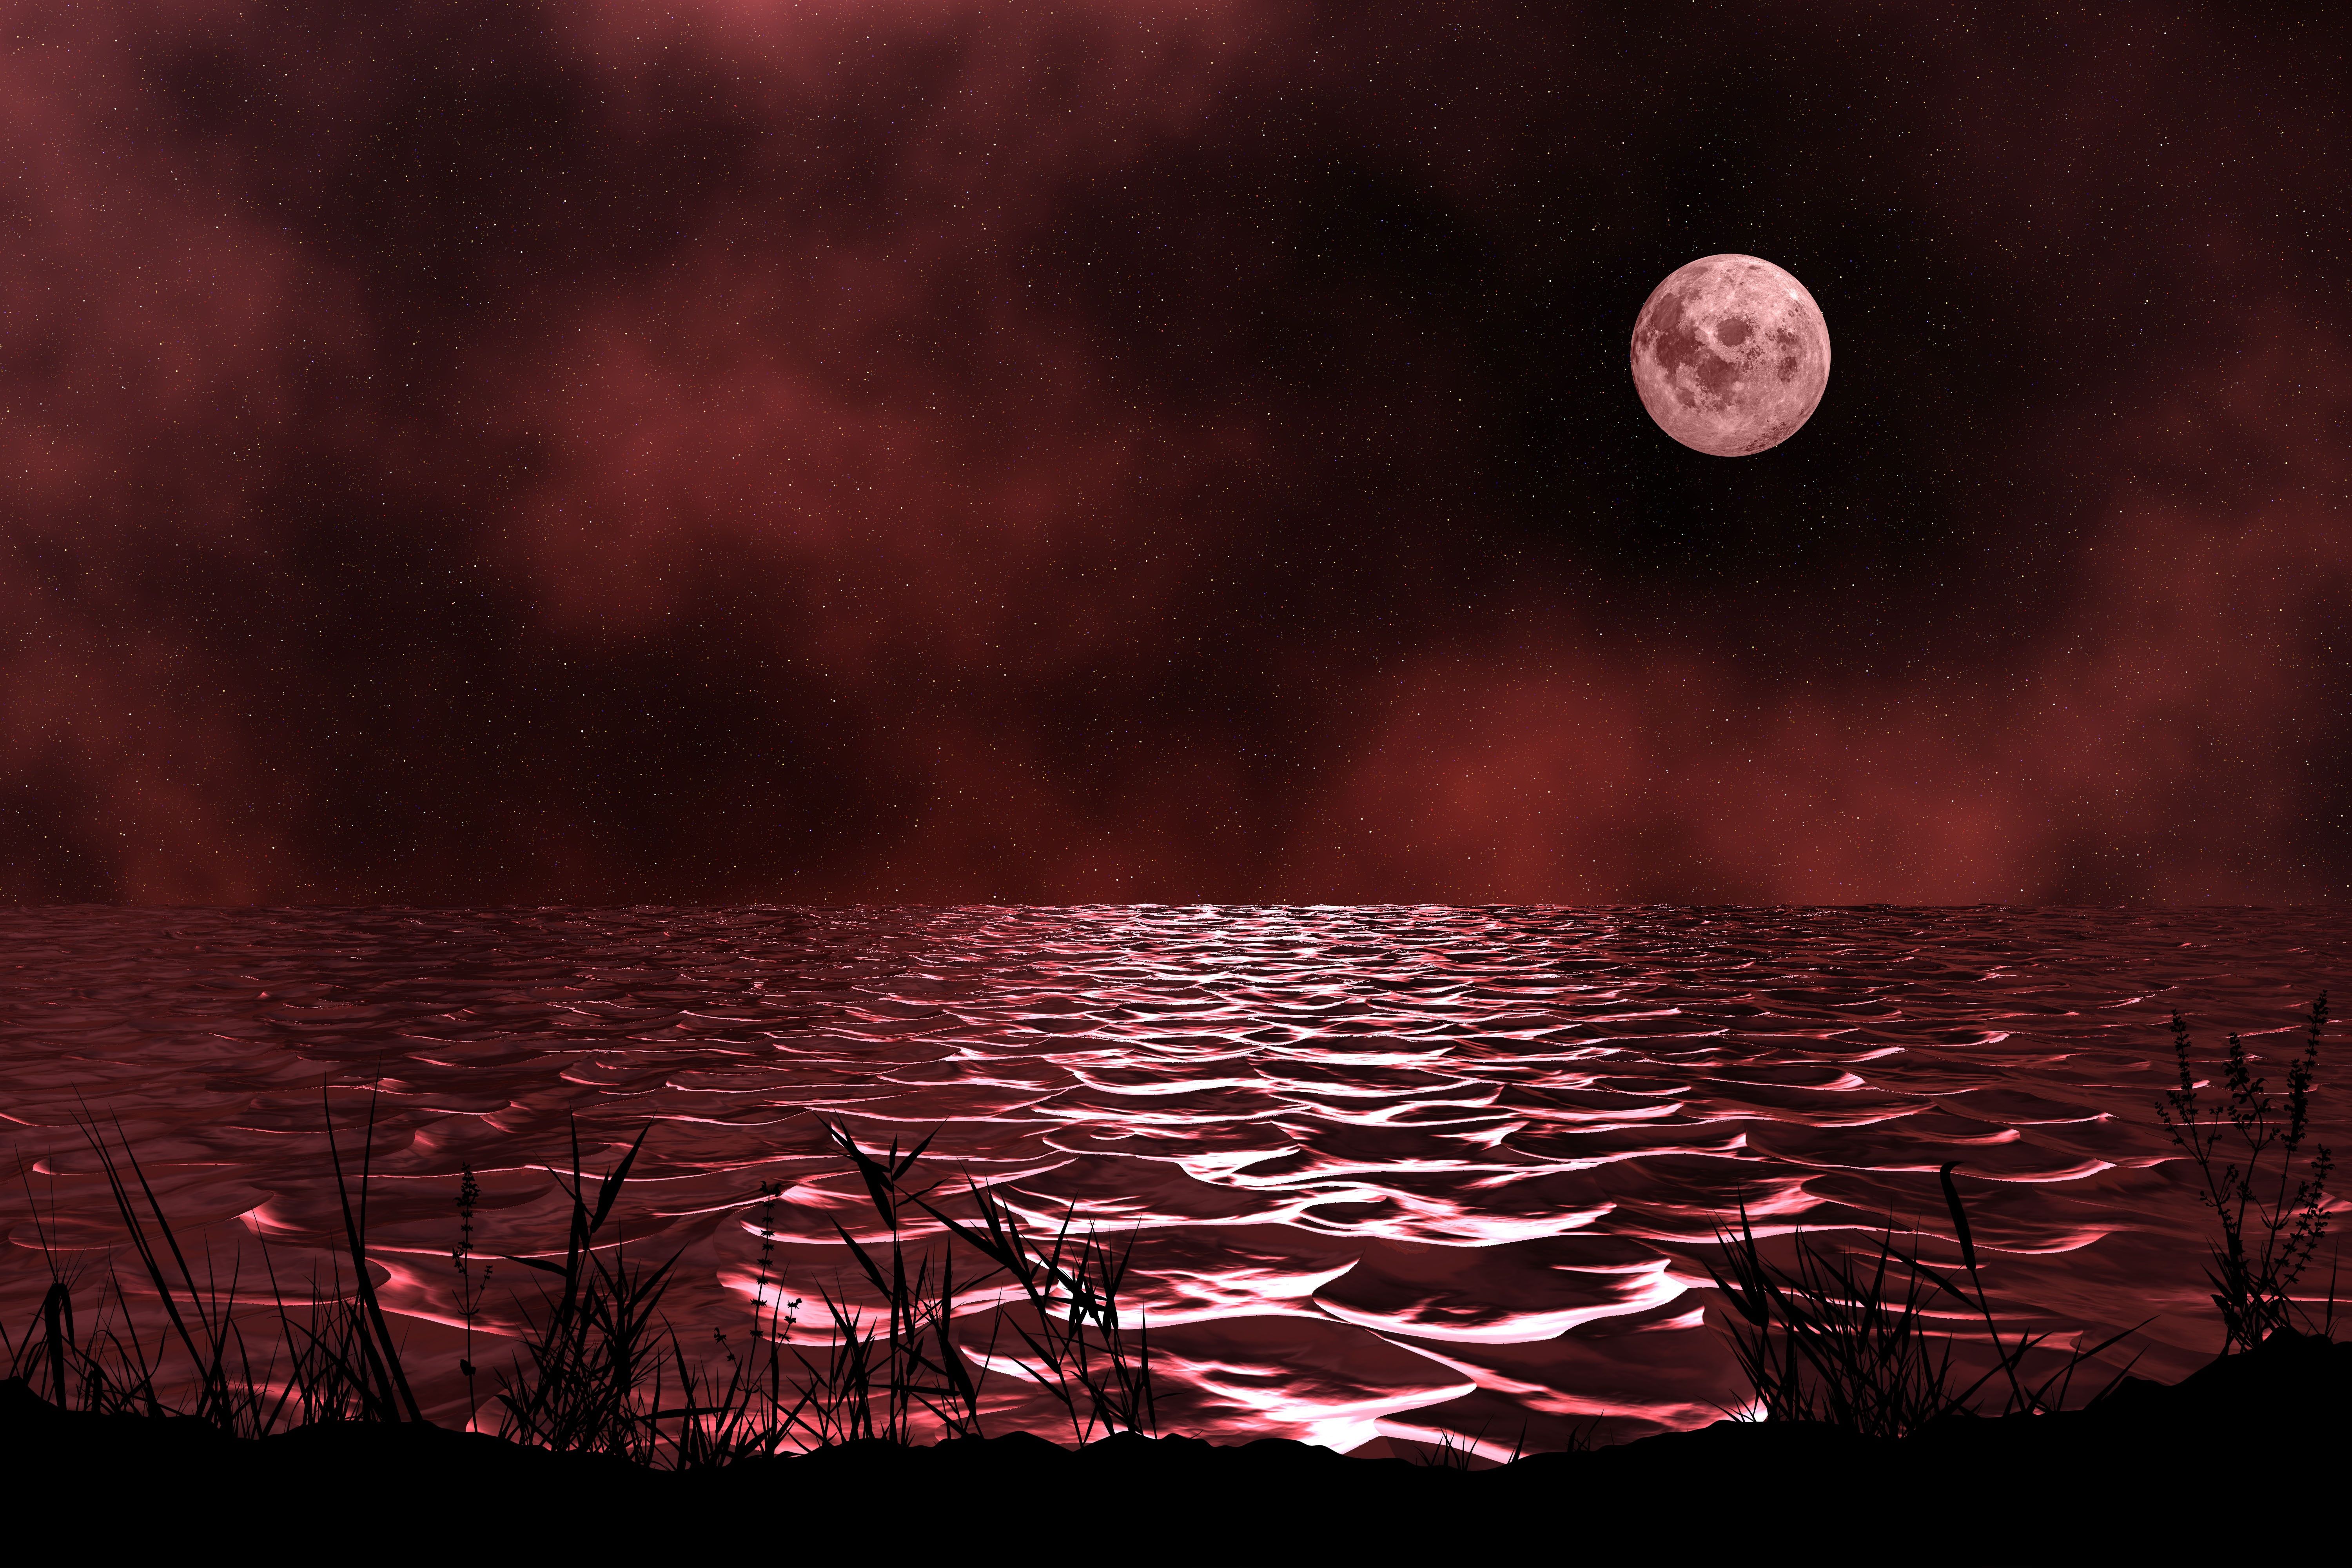 Download wallpaper 6000x4000 sea, night, moon, waves, dim, red HD background